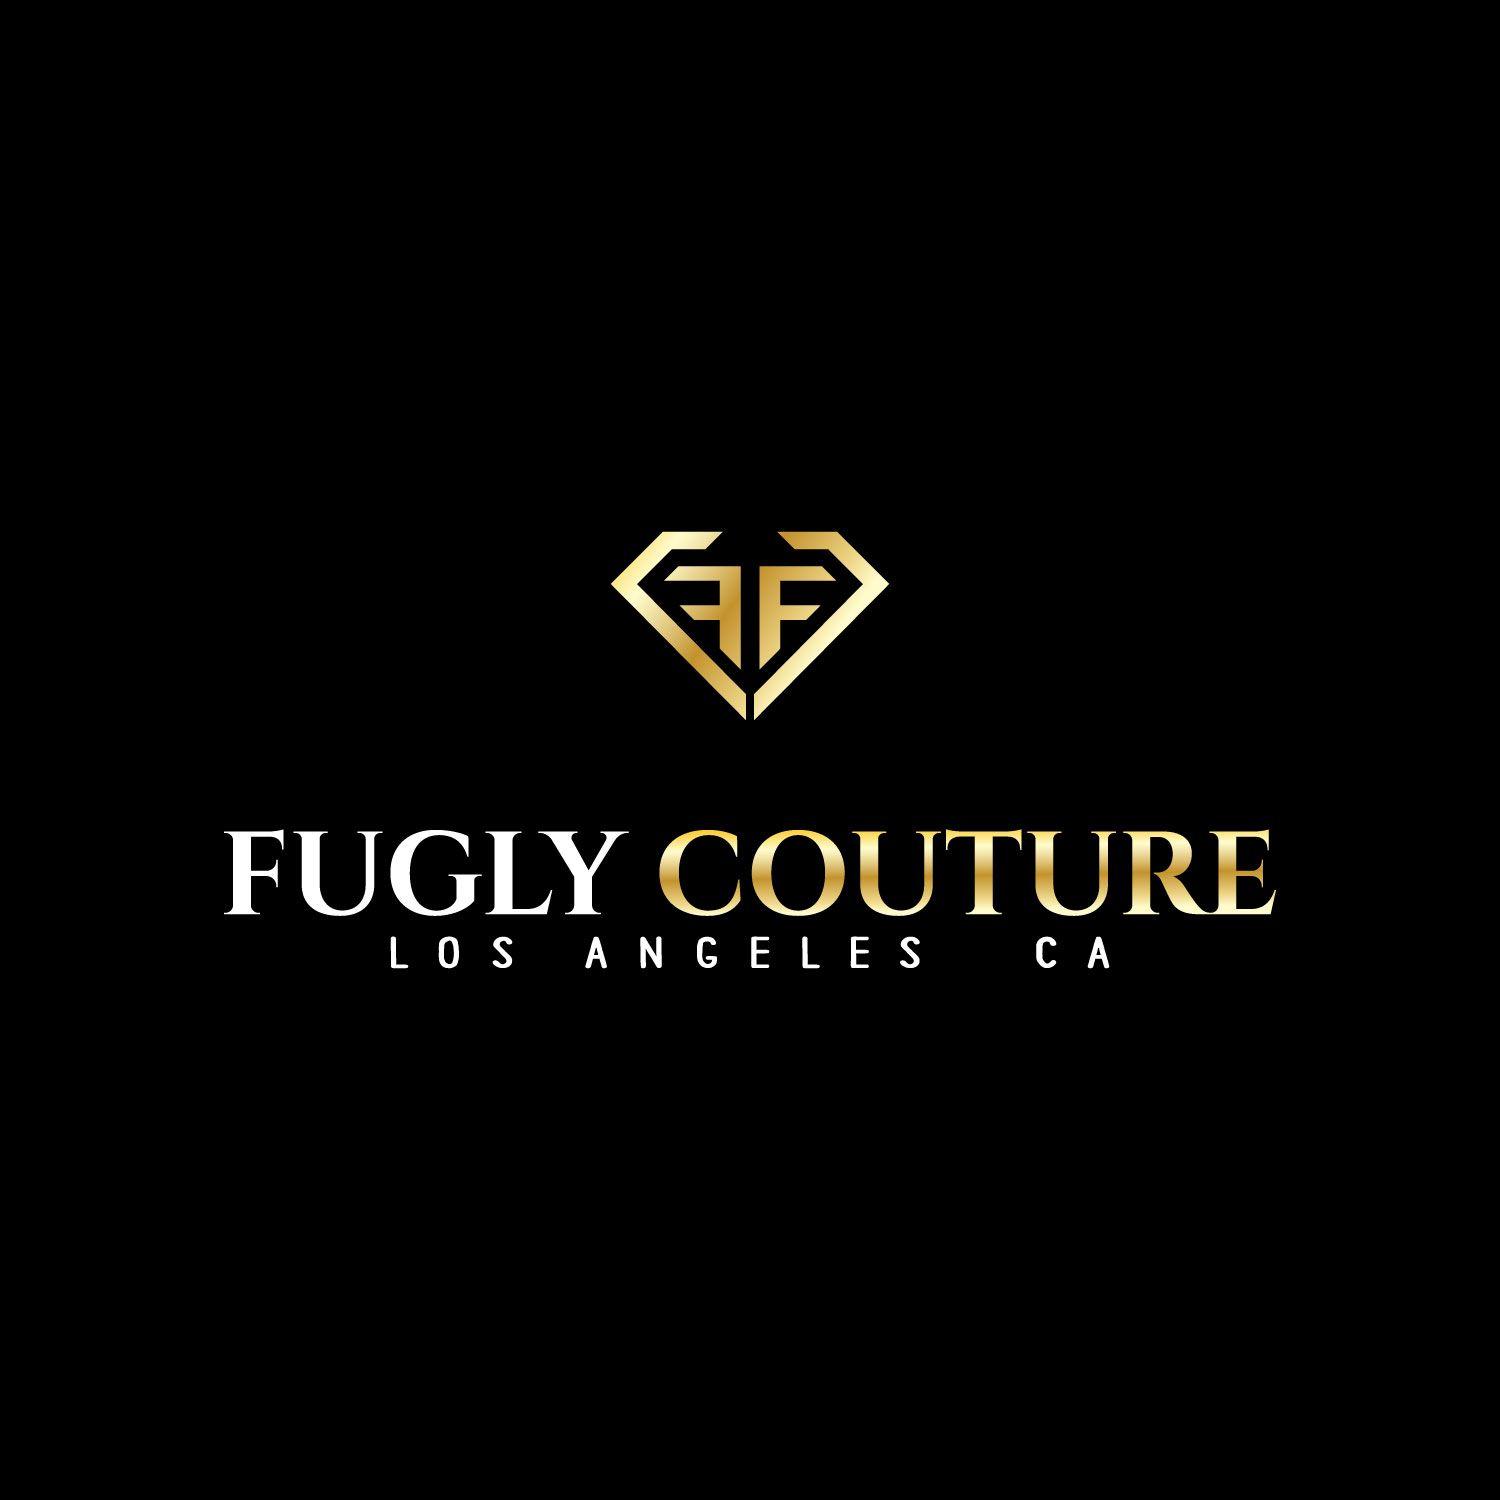 Couture Fashion Logo - Bold, Serious, Fashion Logo Design for FUGLY COUTURE LOS ANGELES, CA ...